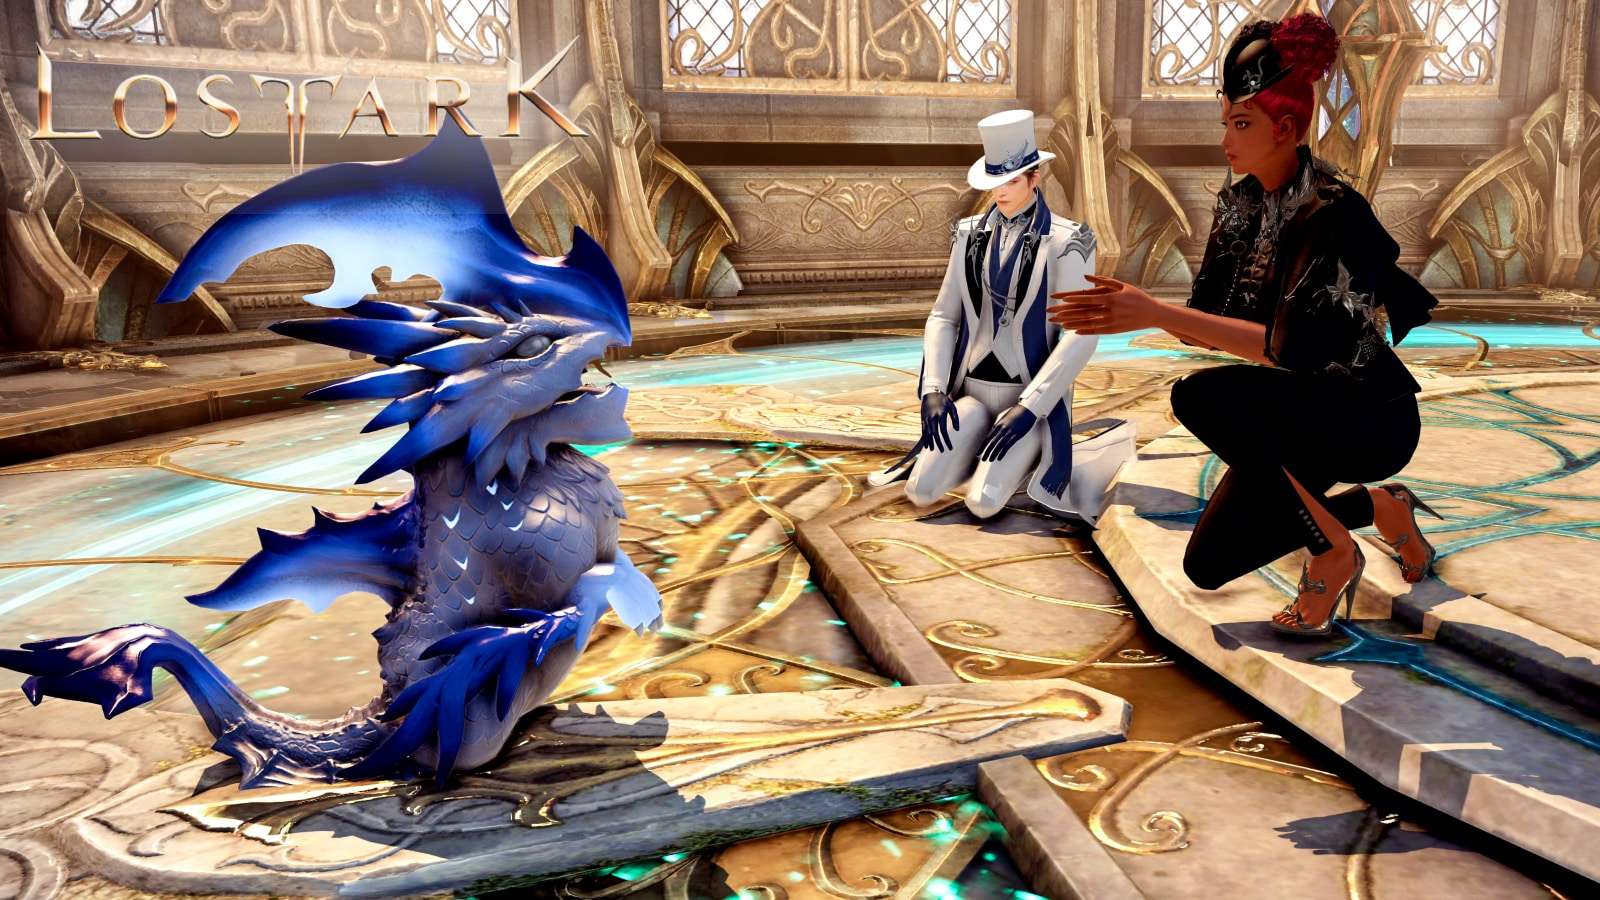 lost ark gunner and martial artist in noble banquet skins play with small dragon pet